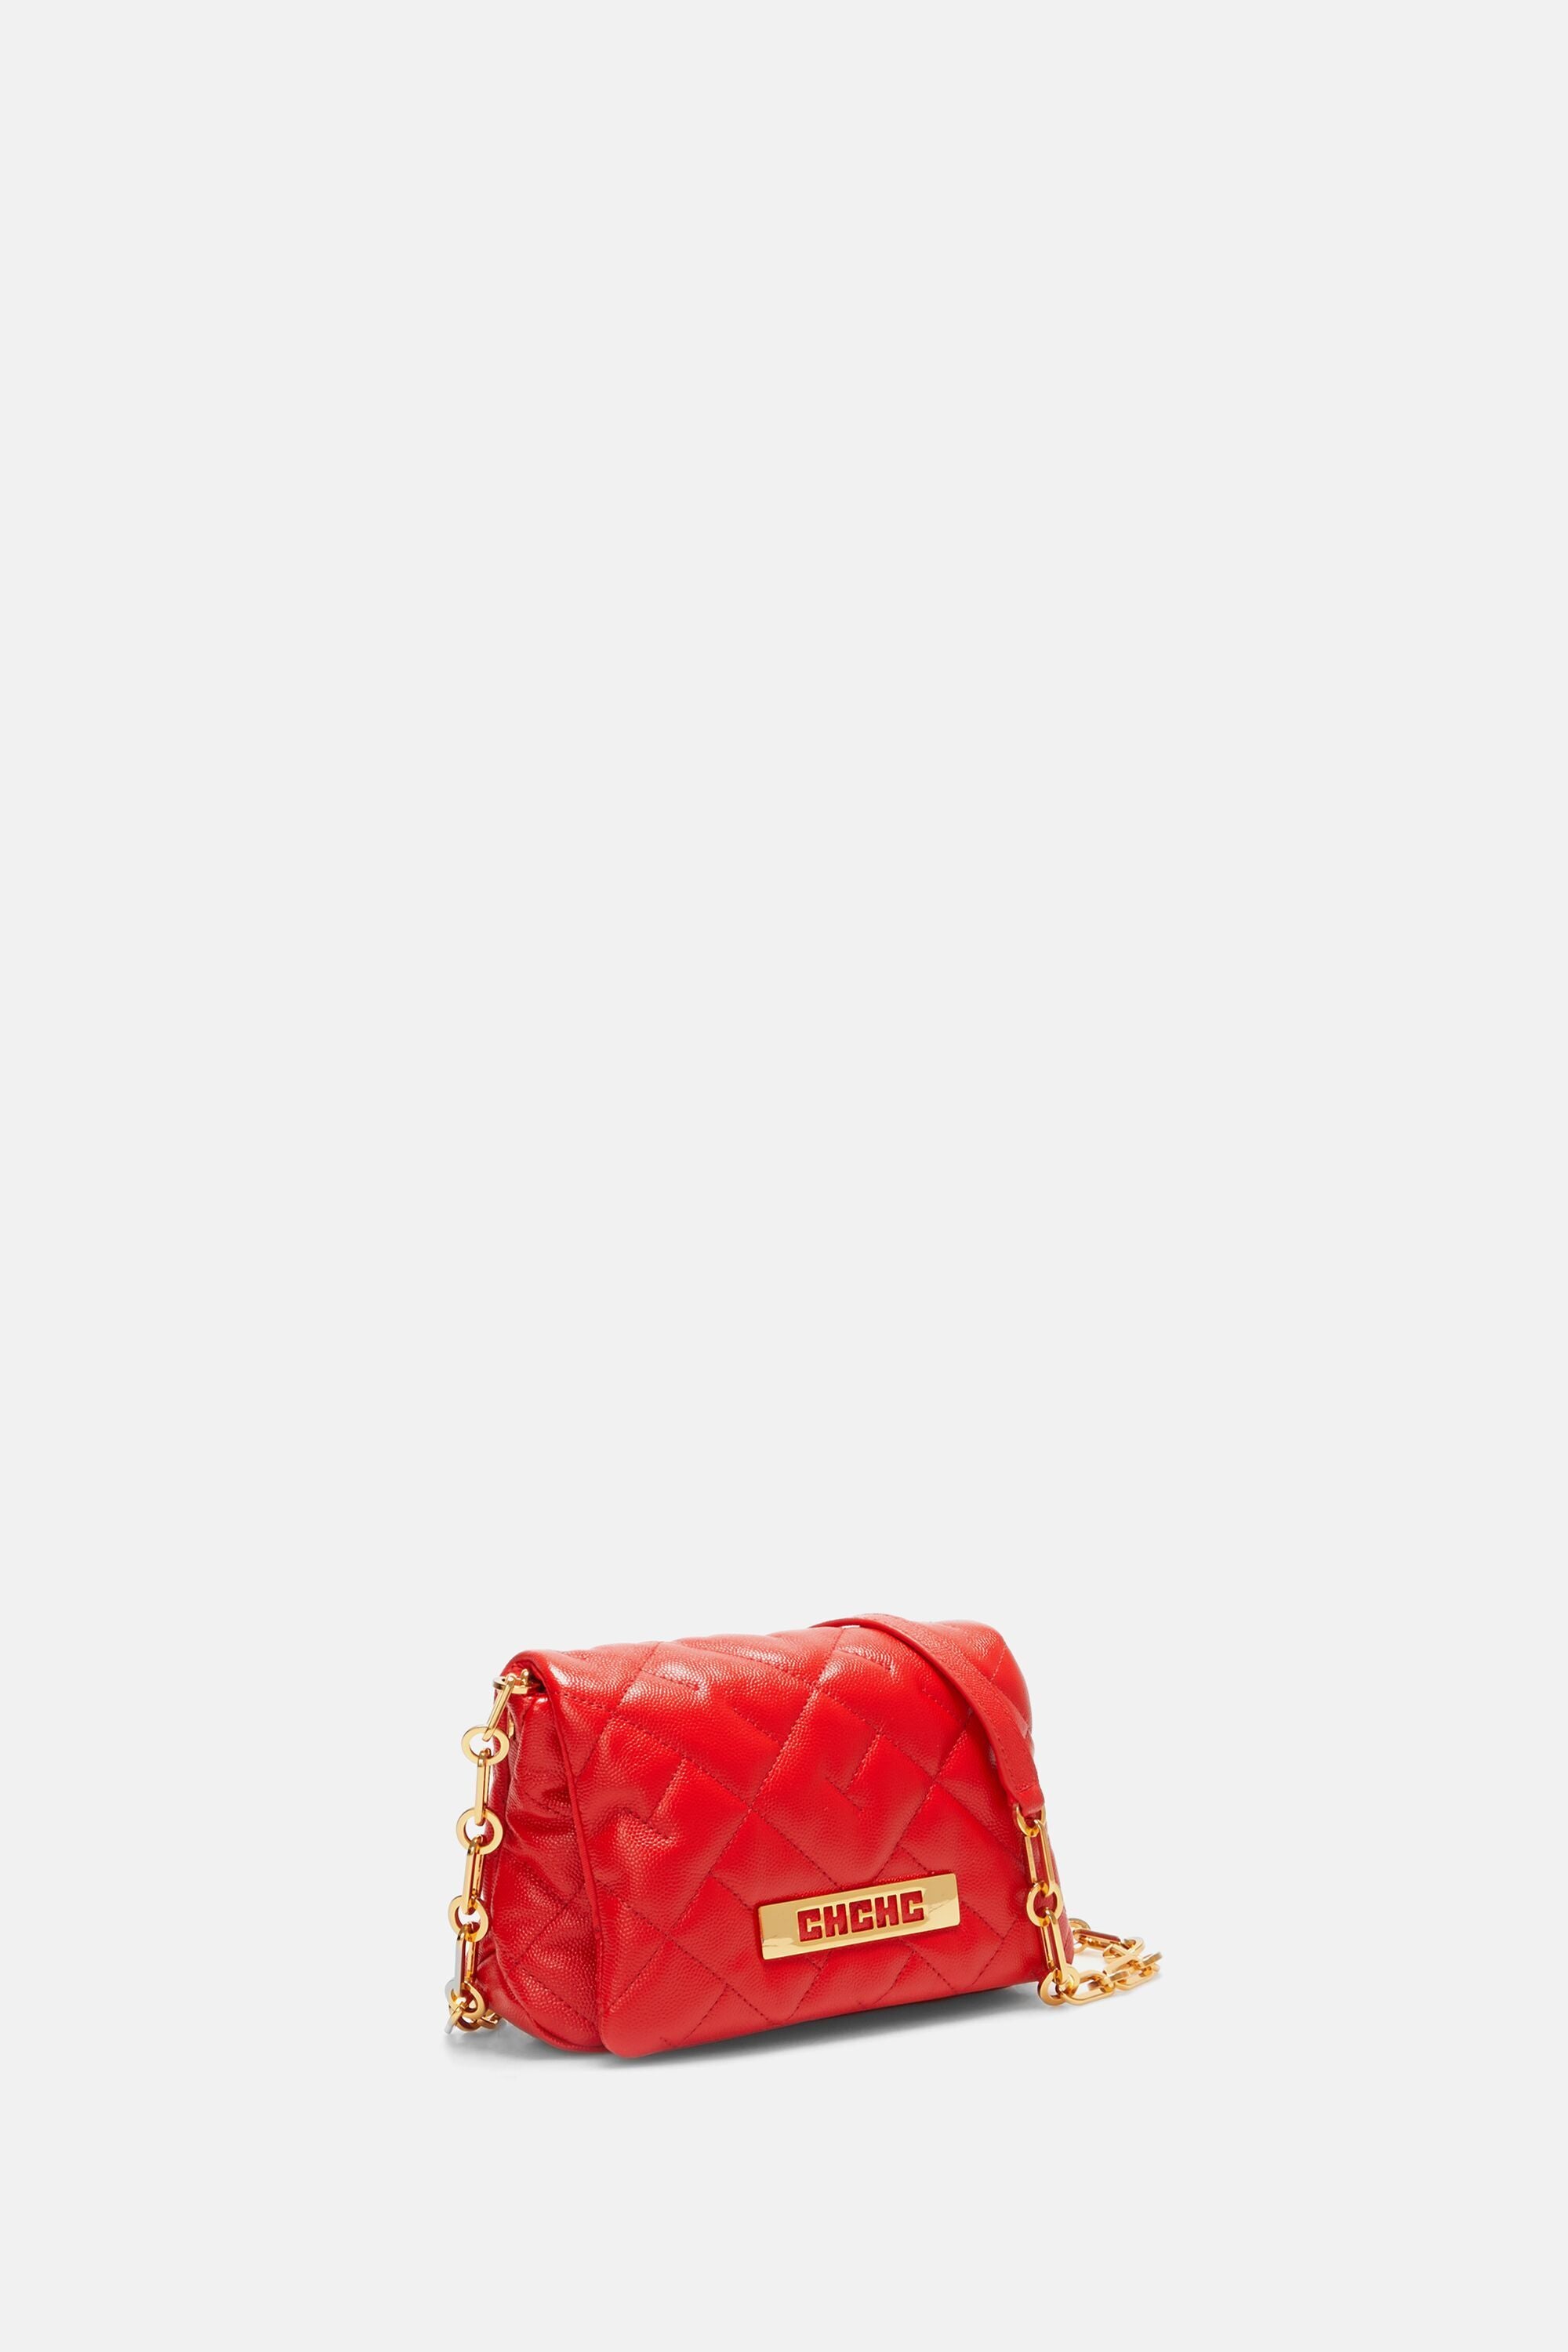 Carolina Herrera Quilted Red Leather Shoulder Bag with Chain Strap and  Wallet